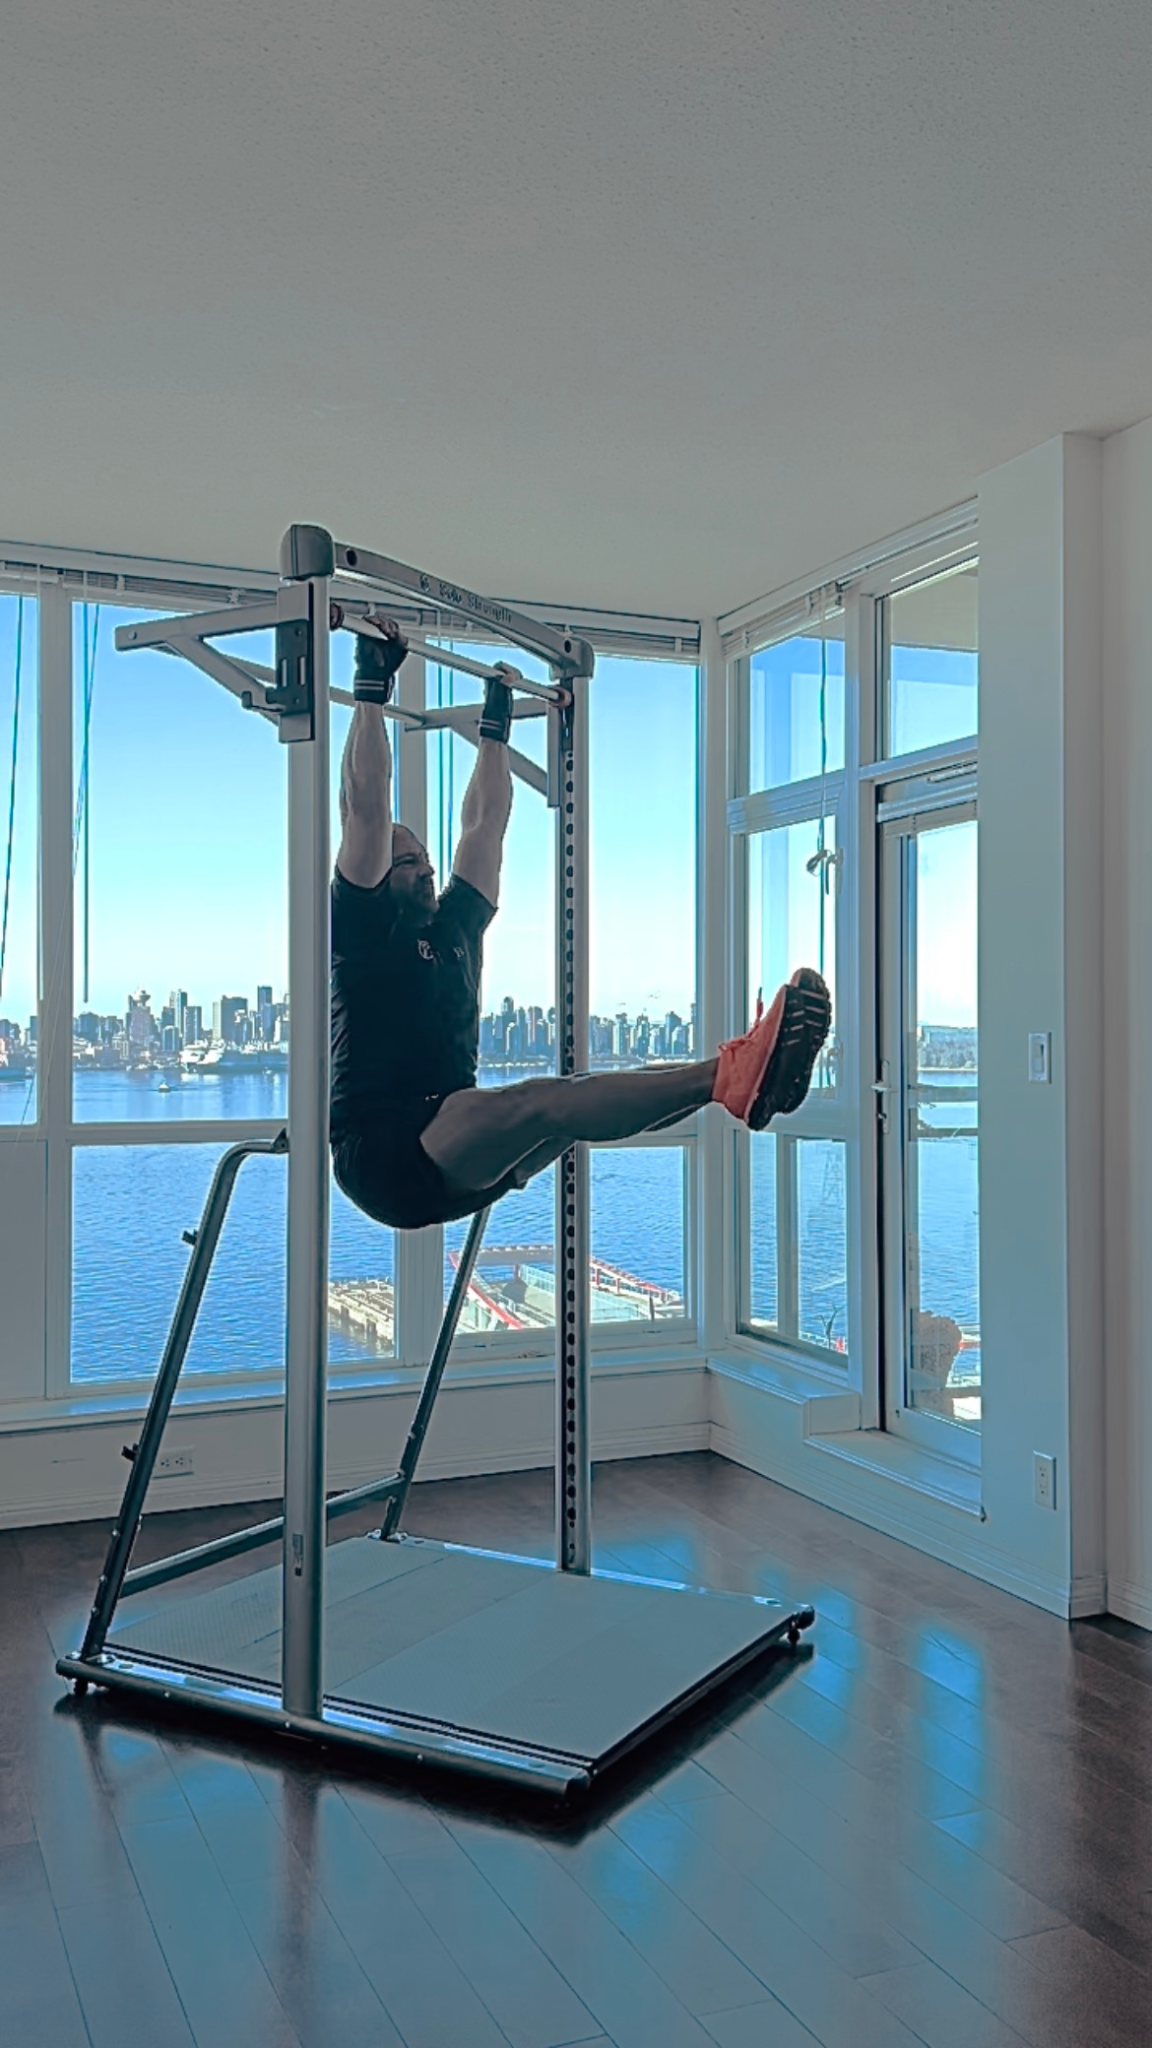 Hanging L-Sit Hold - SoloStrength speedfit home gym exercise equipment free bodyweight calisthenics isometrics stretching workouts